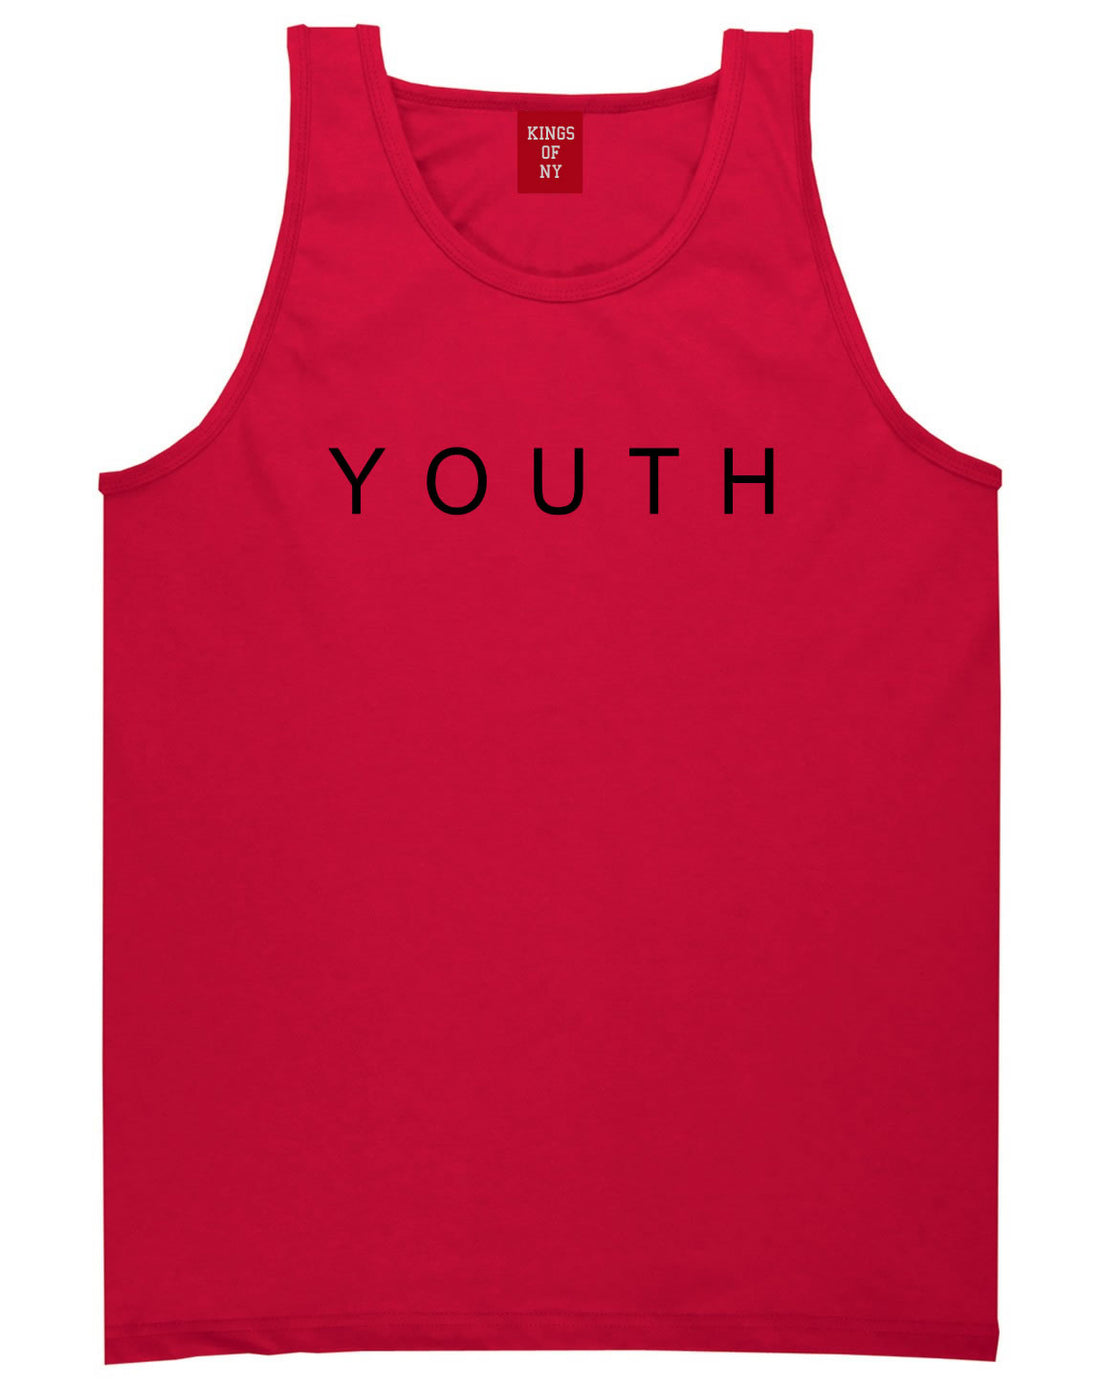 YOUTH Tank Top